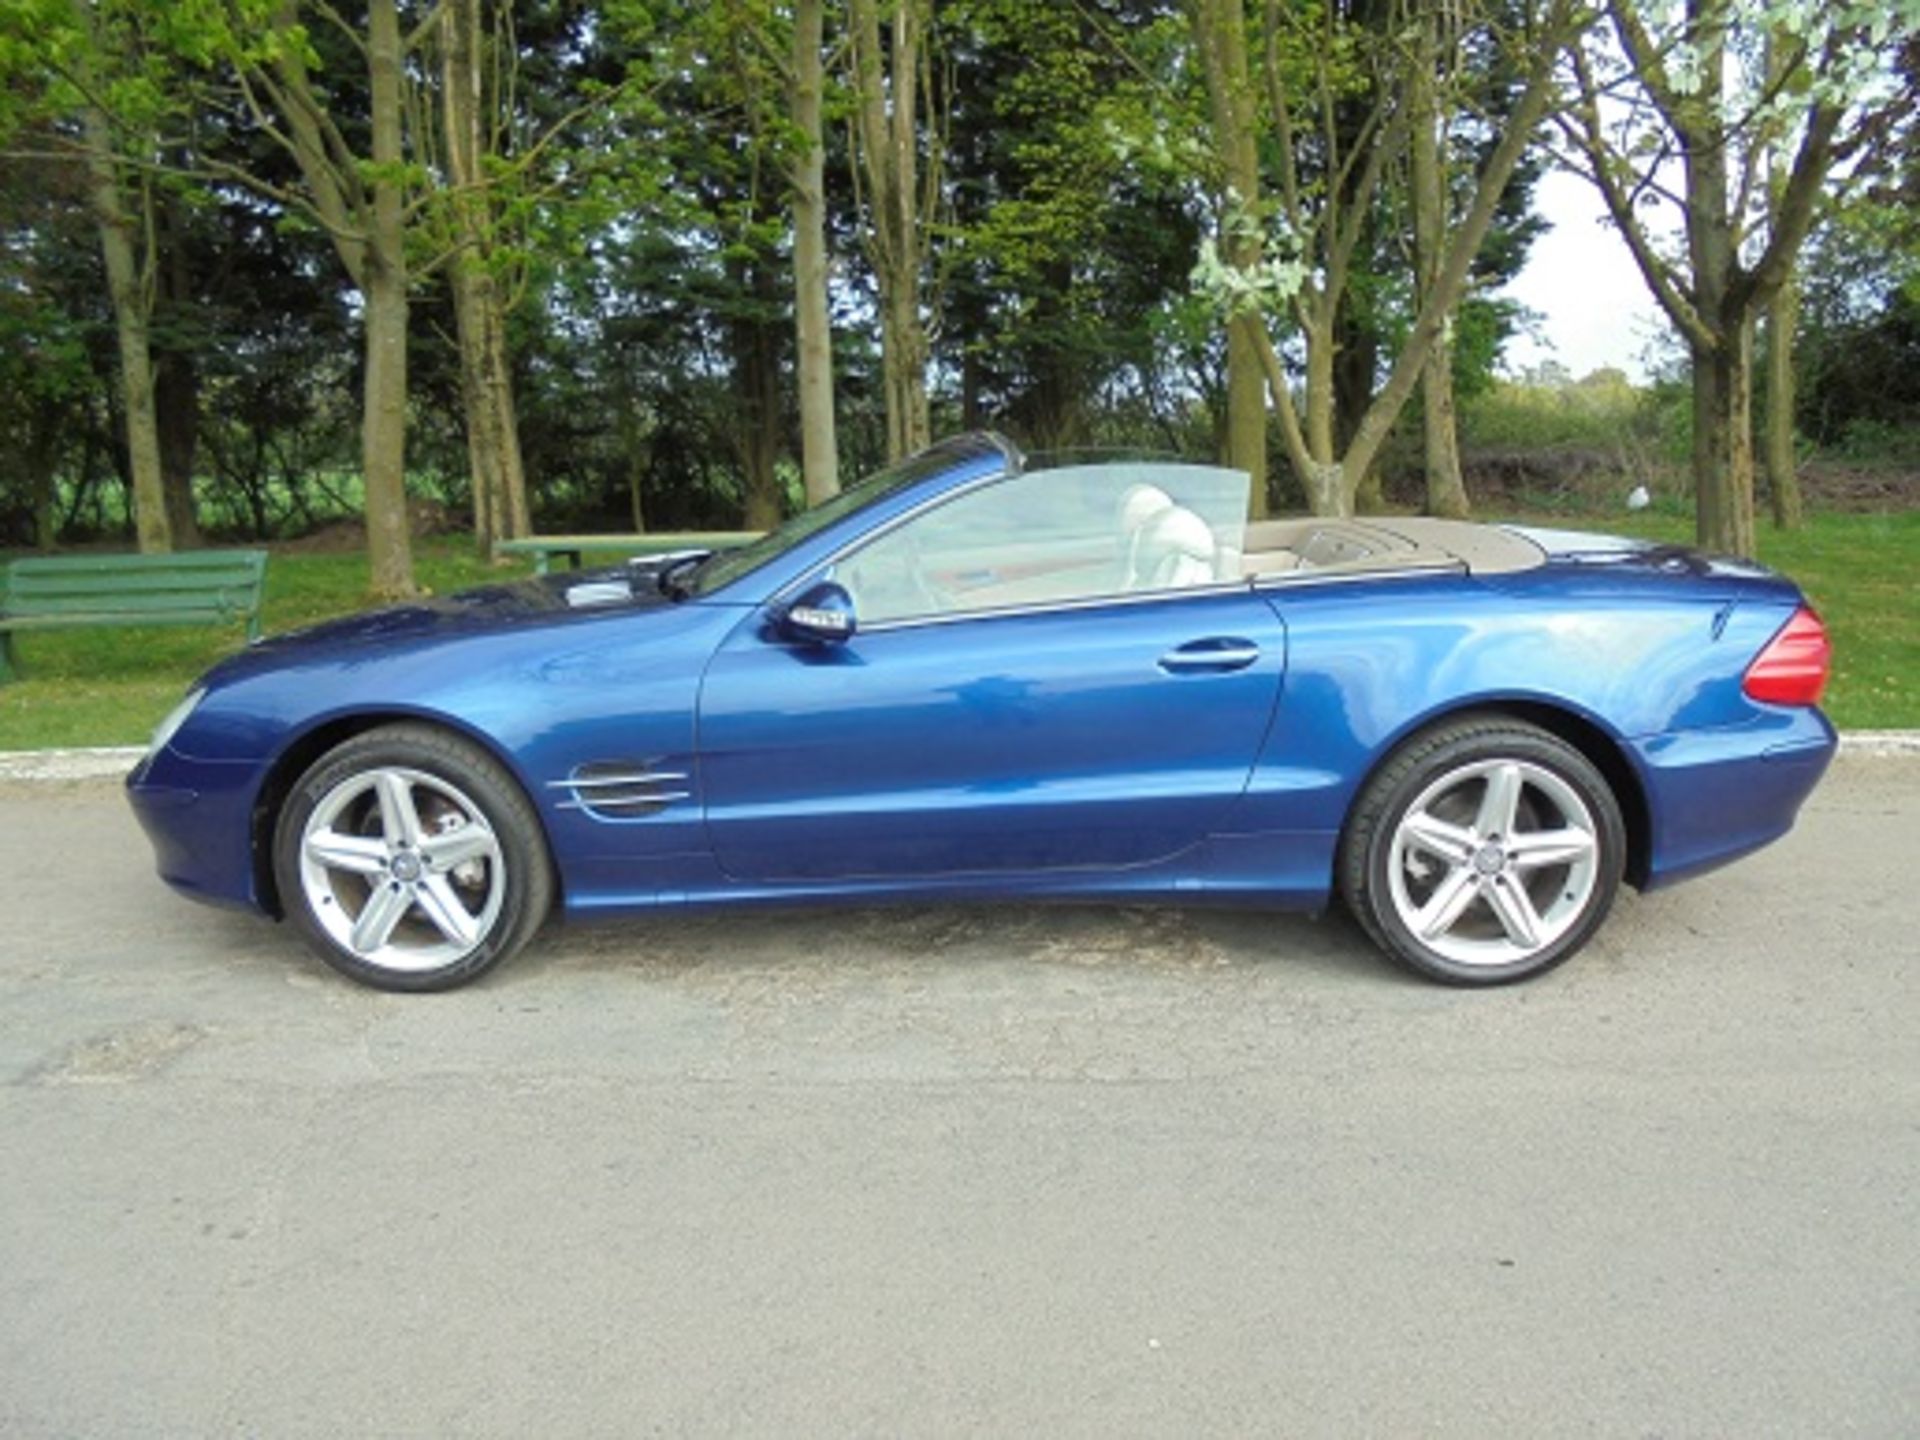 MERCEDES SL350 CONVERTIBLE WITH PRIVATE PLATE: L1OBY INCLUDED - Image 2 of 12